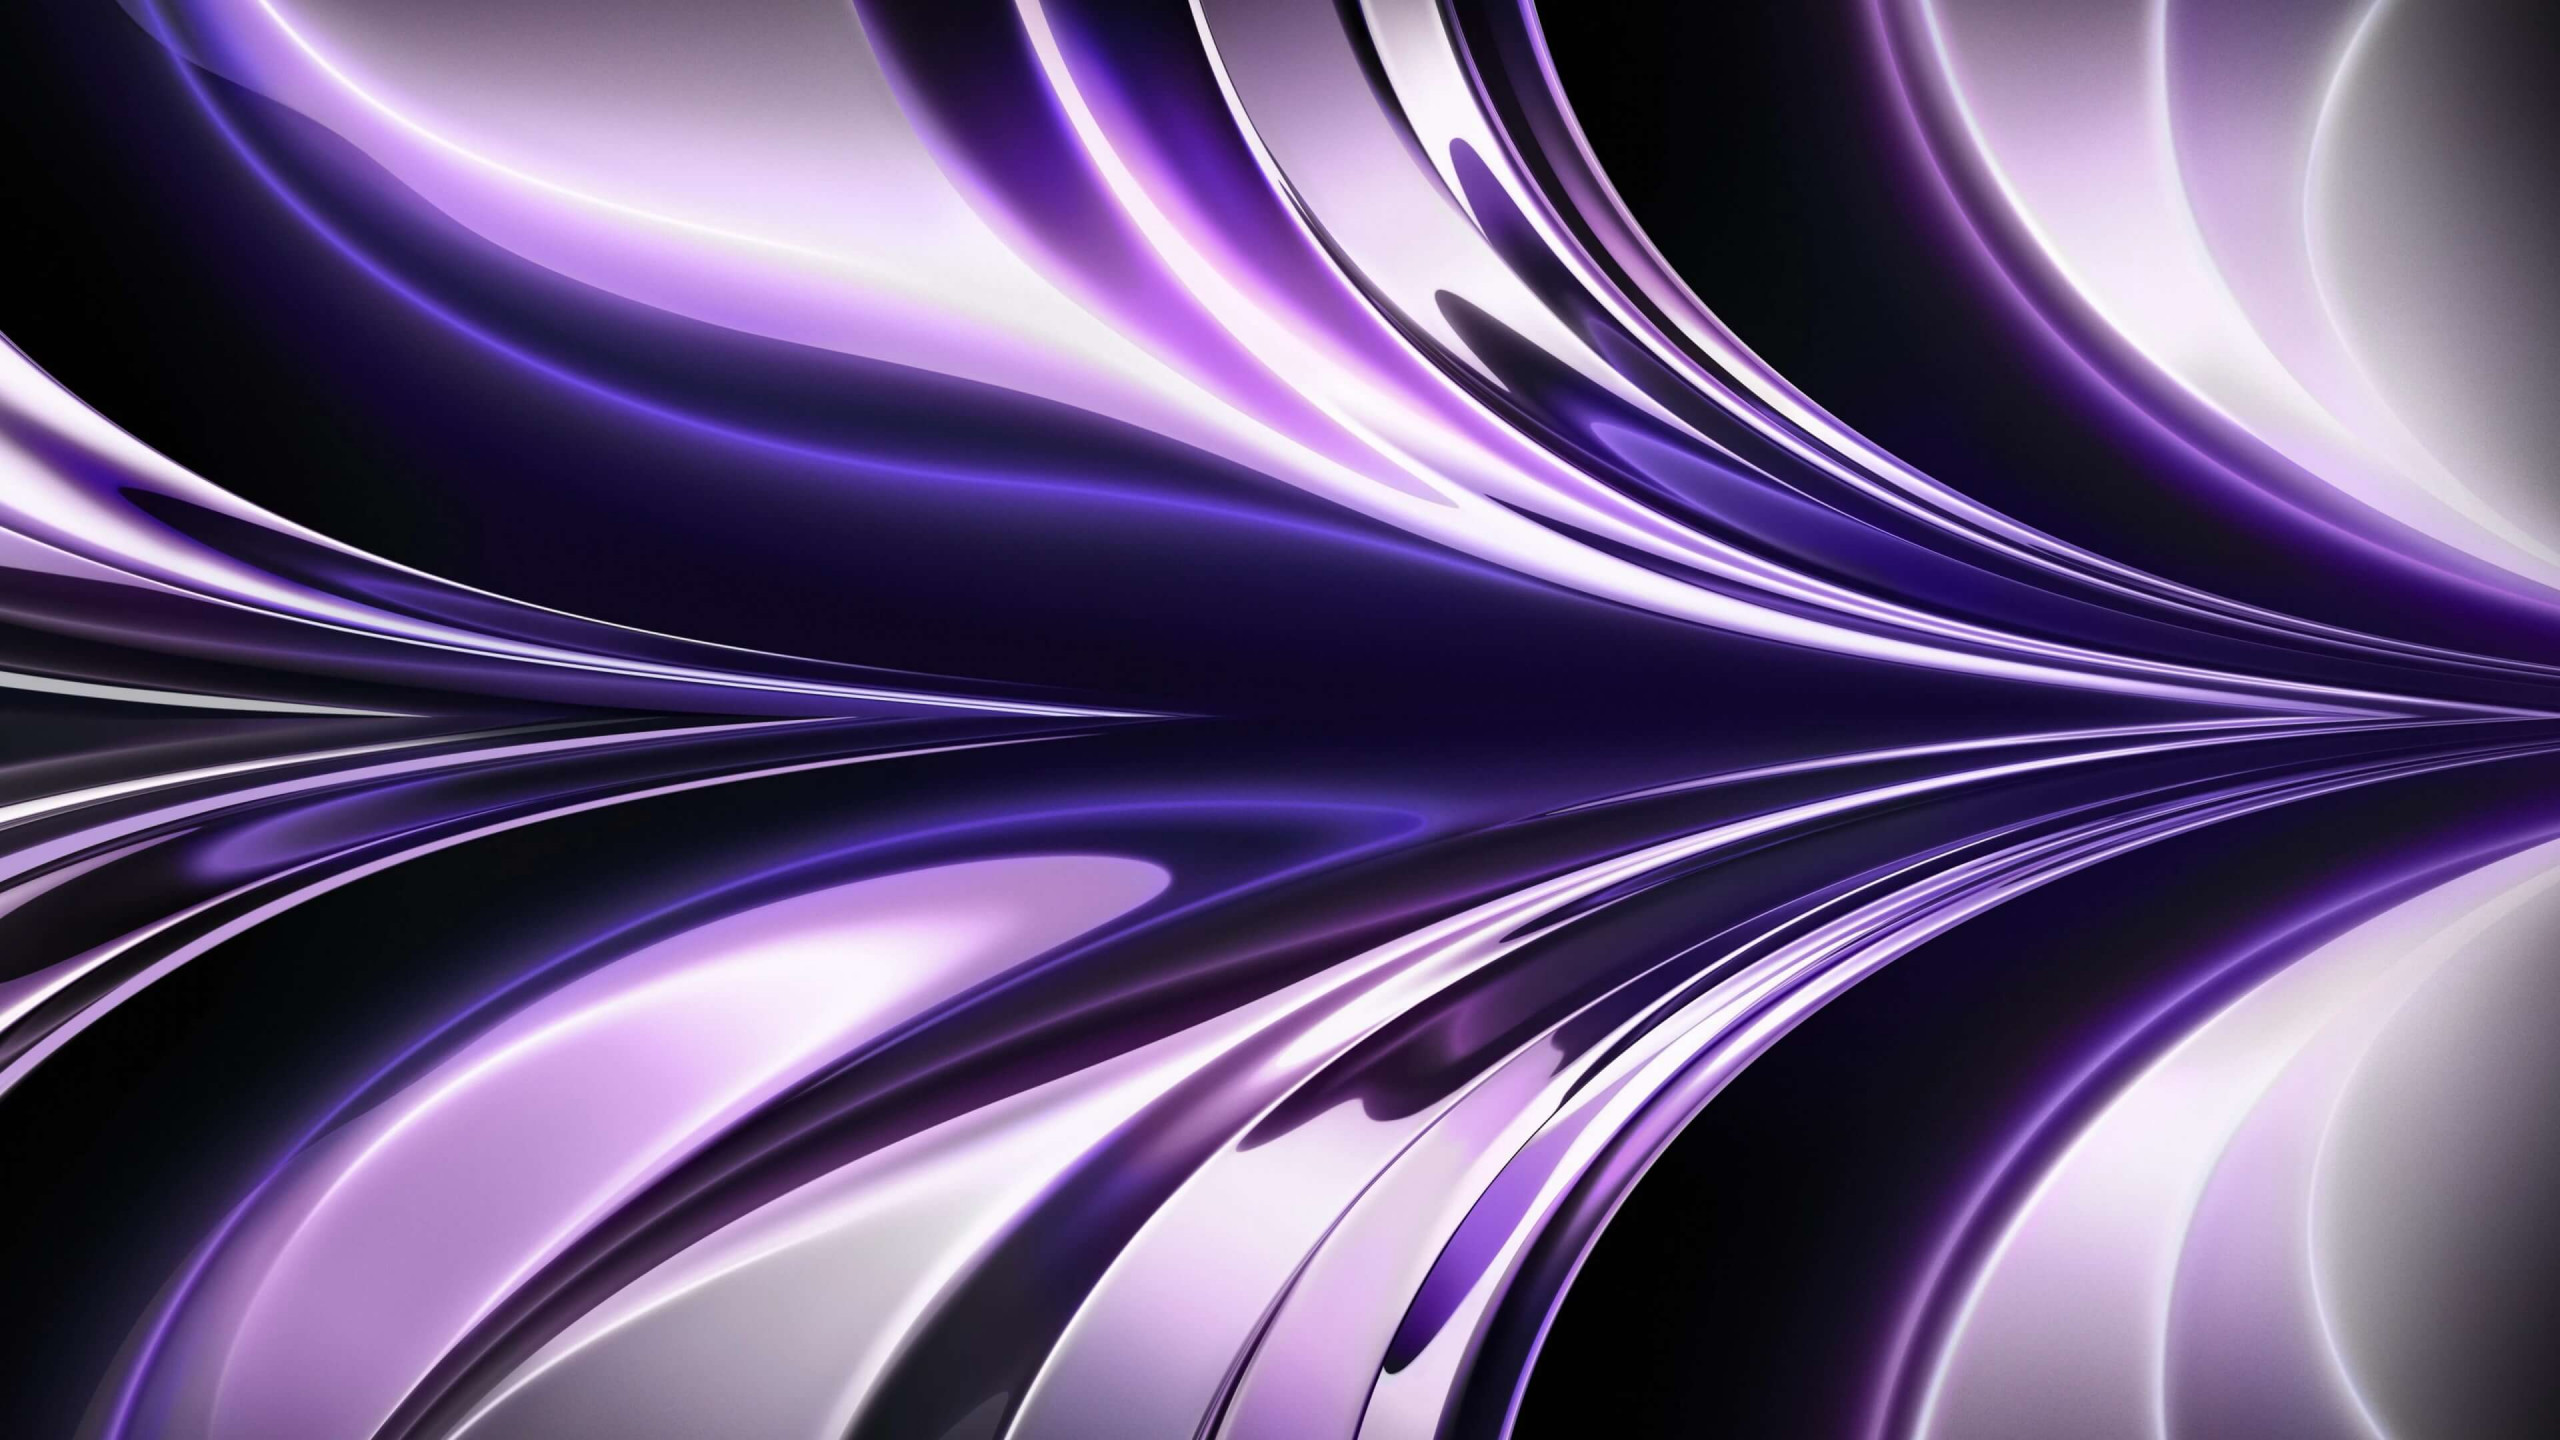 iOS 16 abstract purple style wallpaper 2560x1440